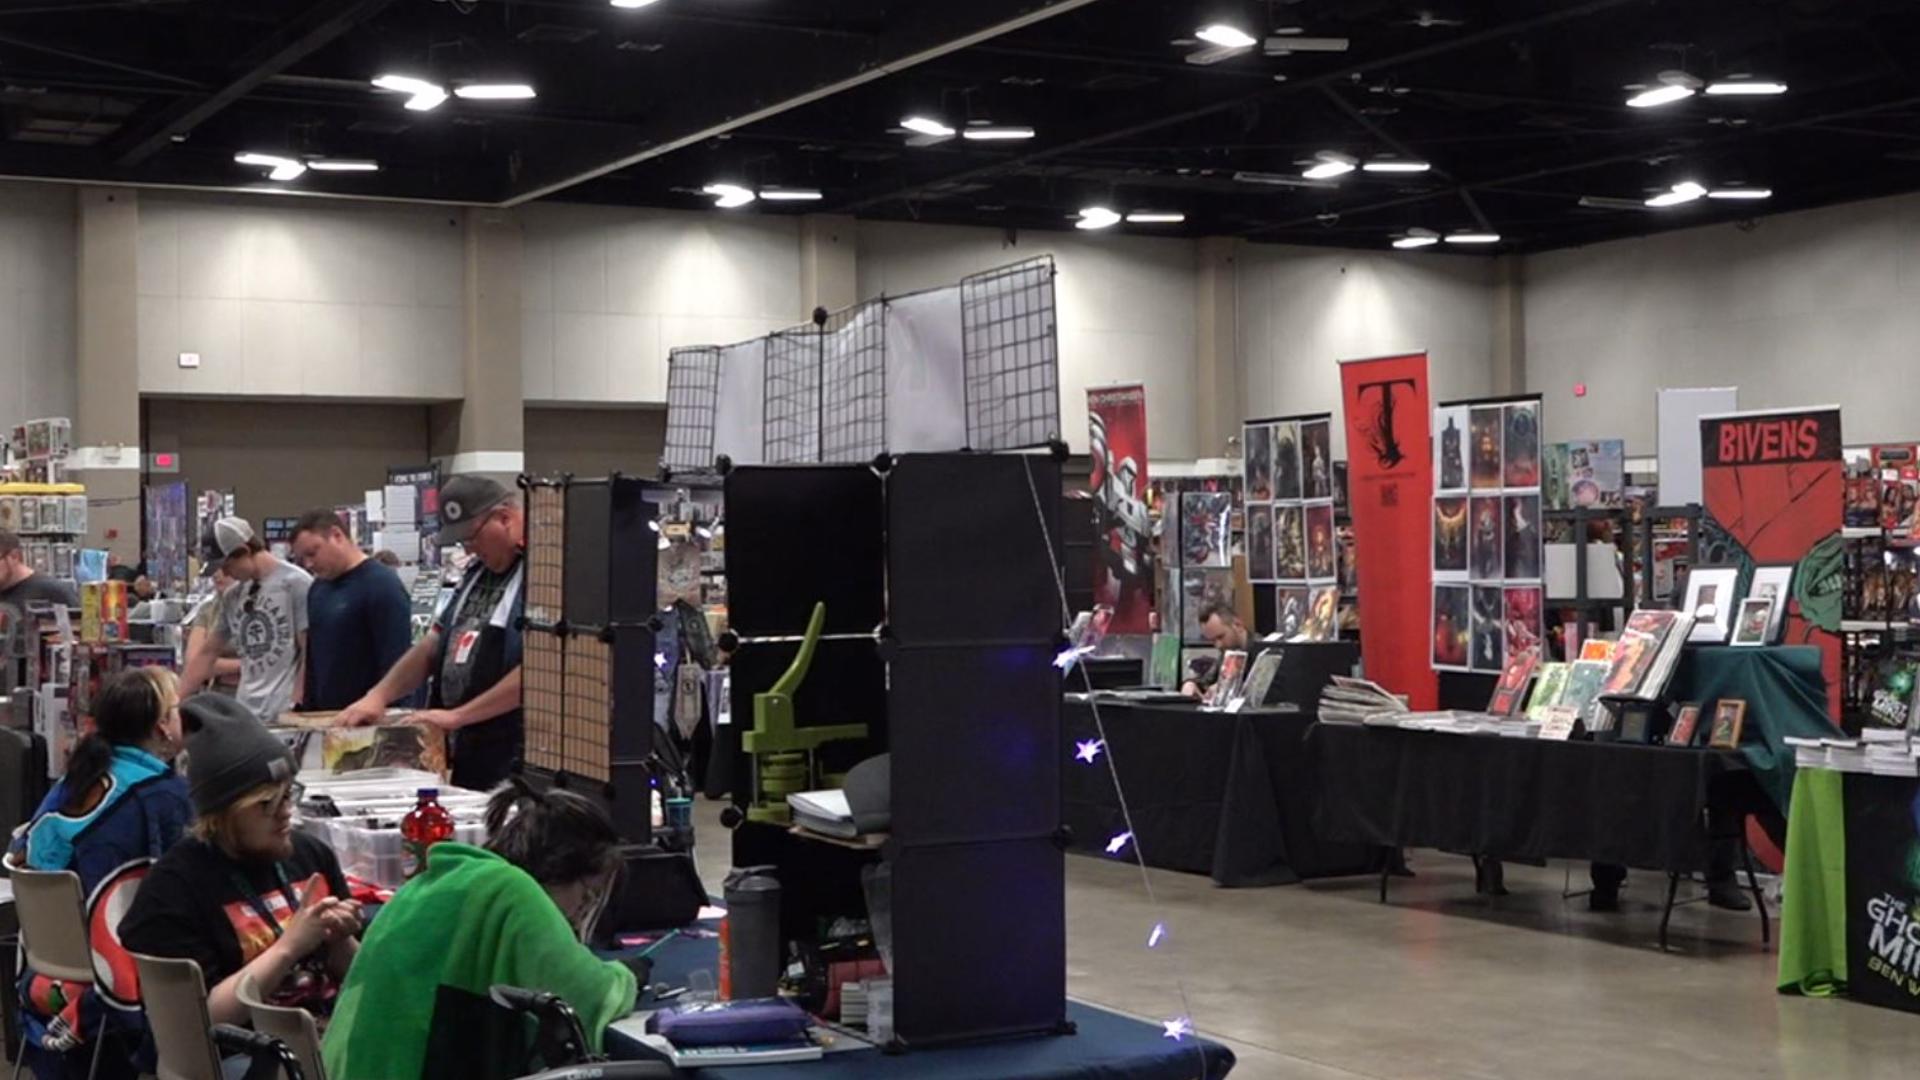 It's arguably the largest annual comic convention in the Quad Cities, featuring voice actors, collectibles, comic books and more.